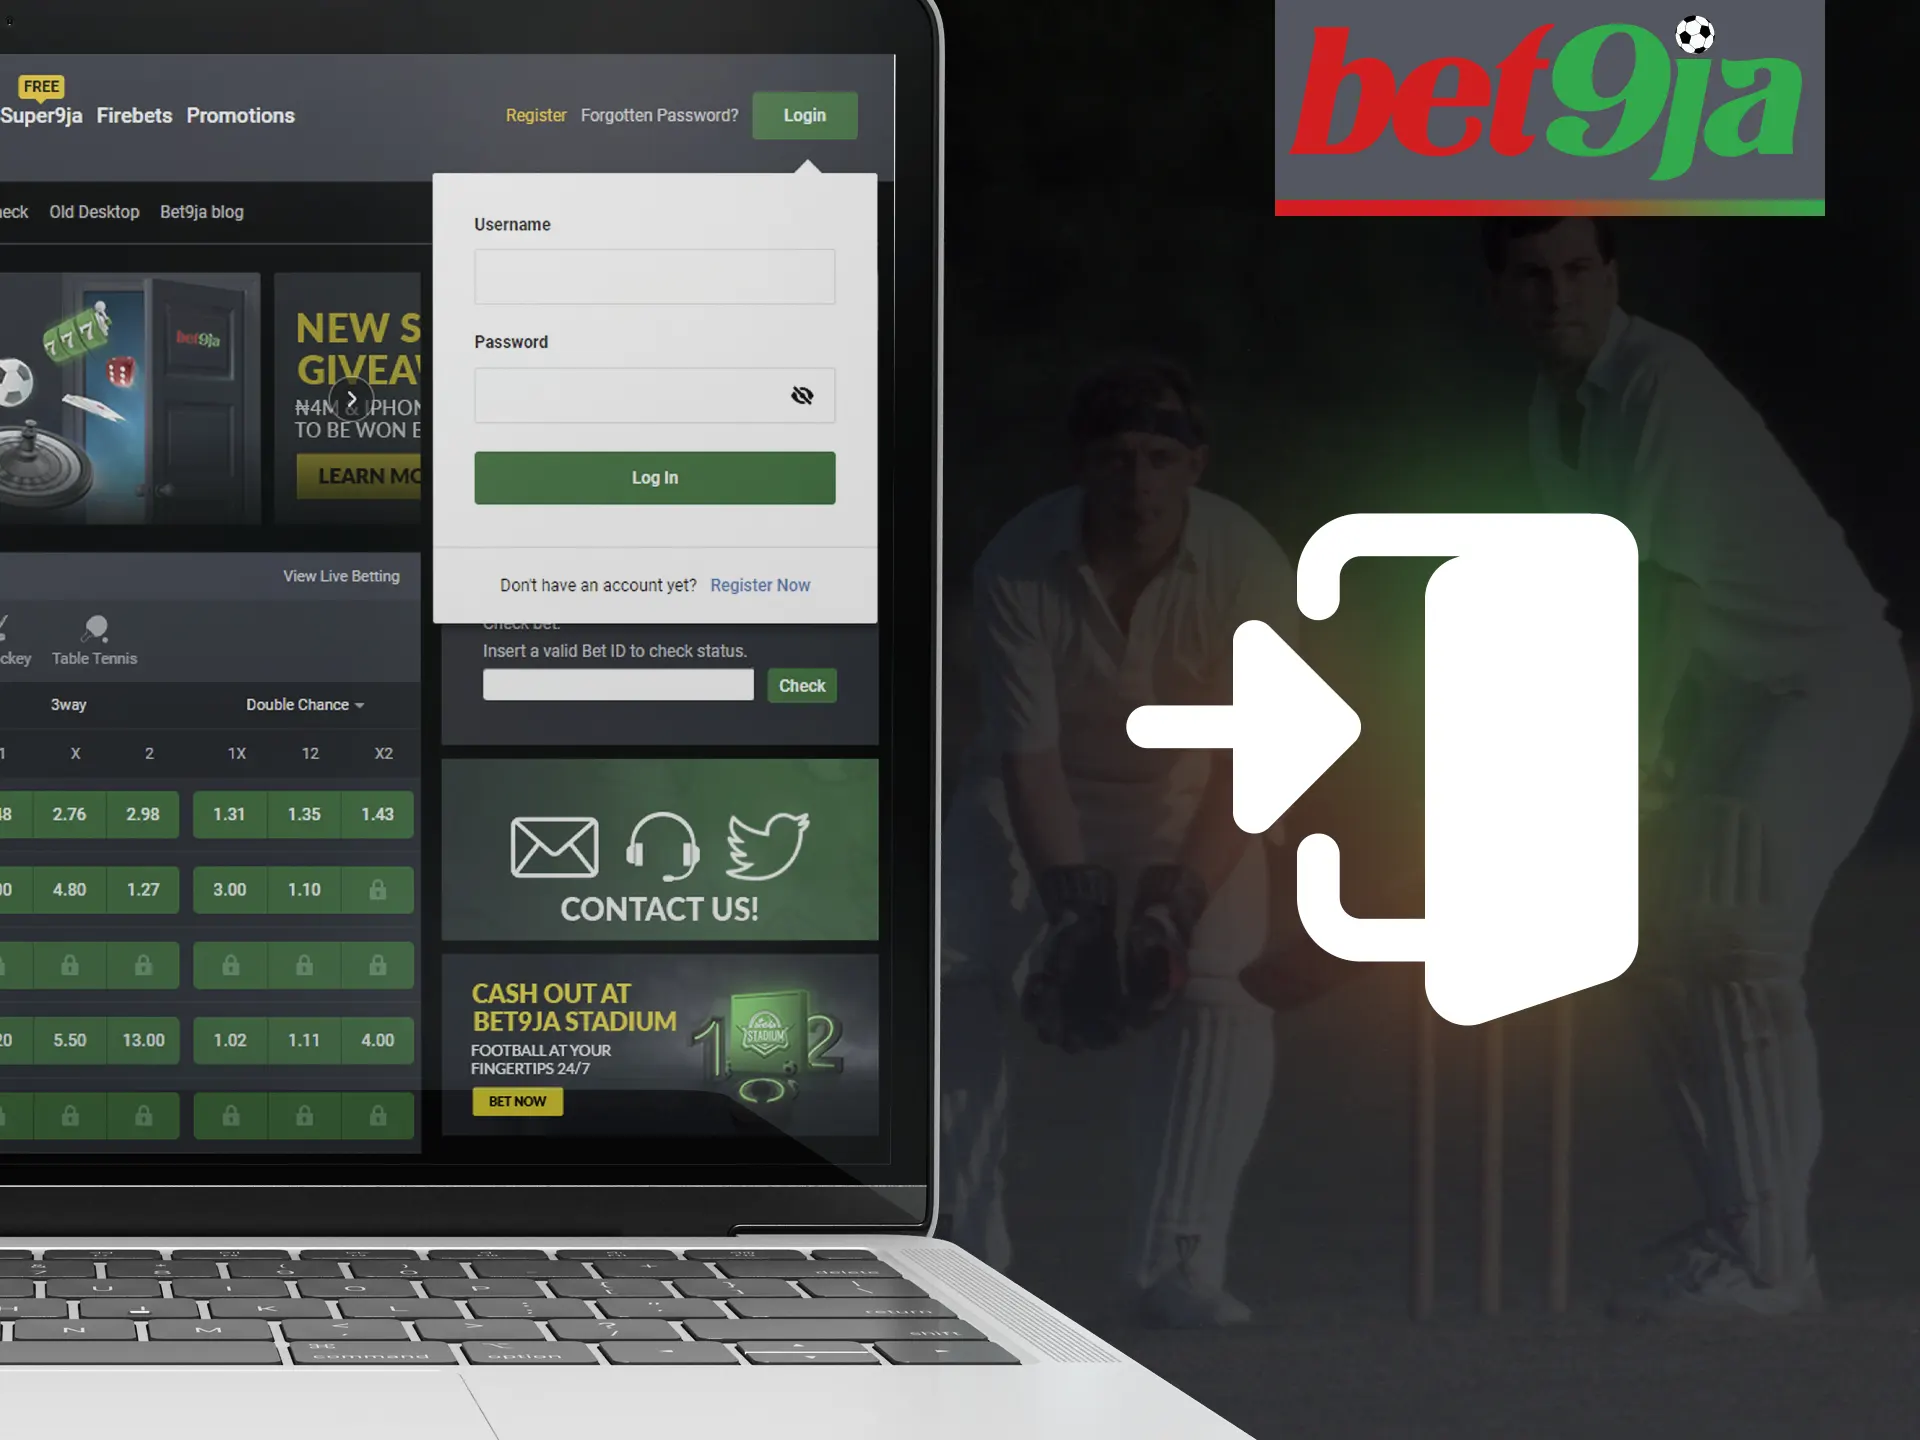 Be sure to log in to your bet9ja account.